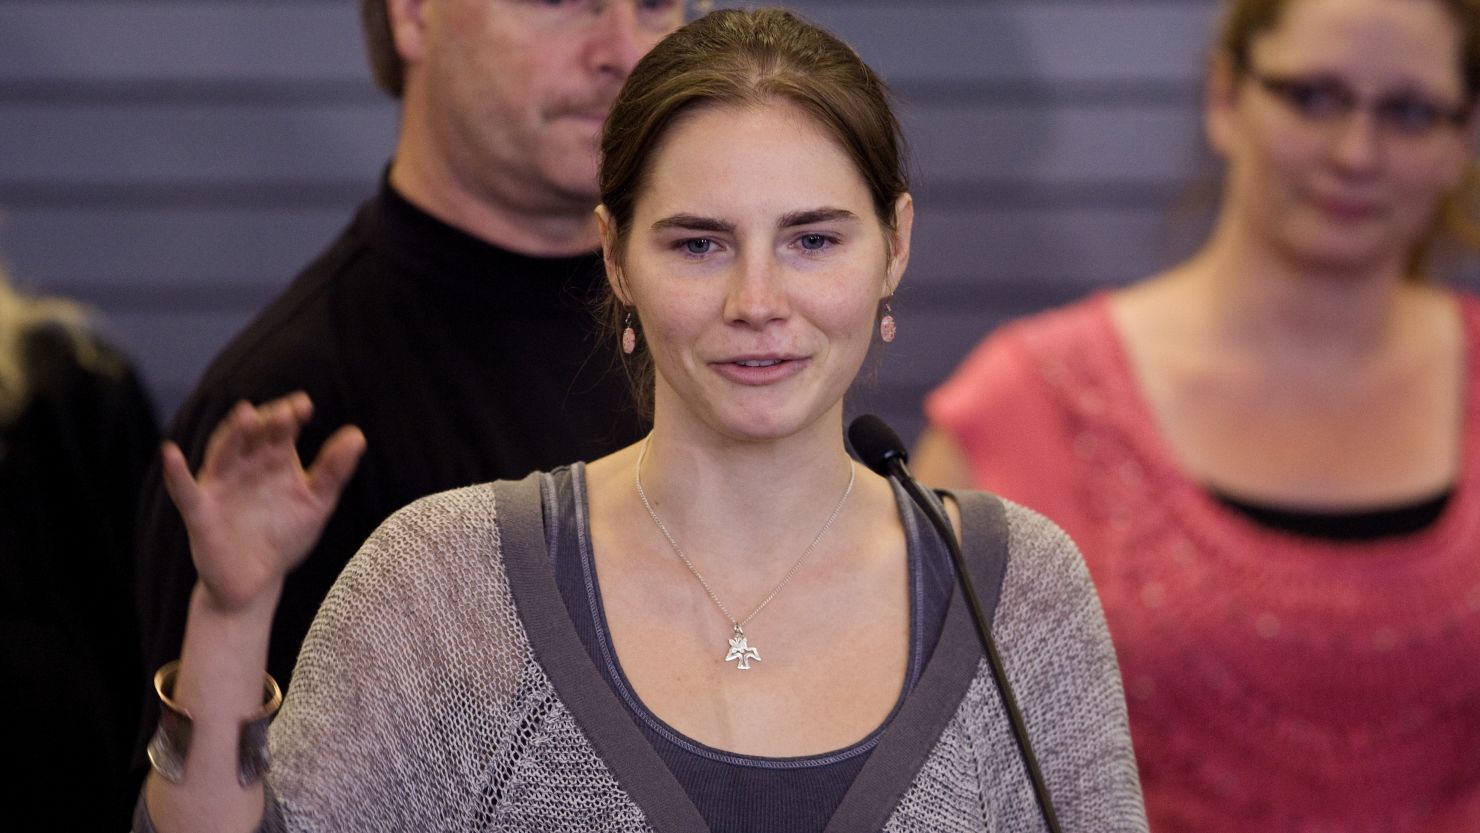 Amanda Knox arrives in Seattle in October after her prison release. She will write a book about her ordeal, HarperCollins says.